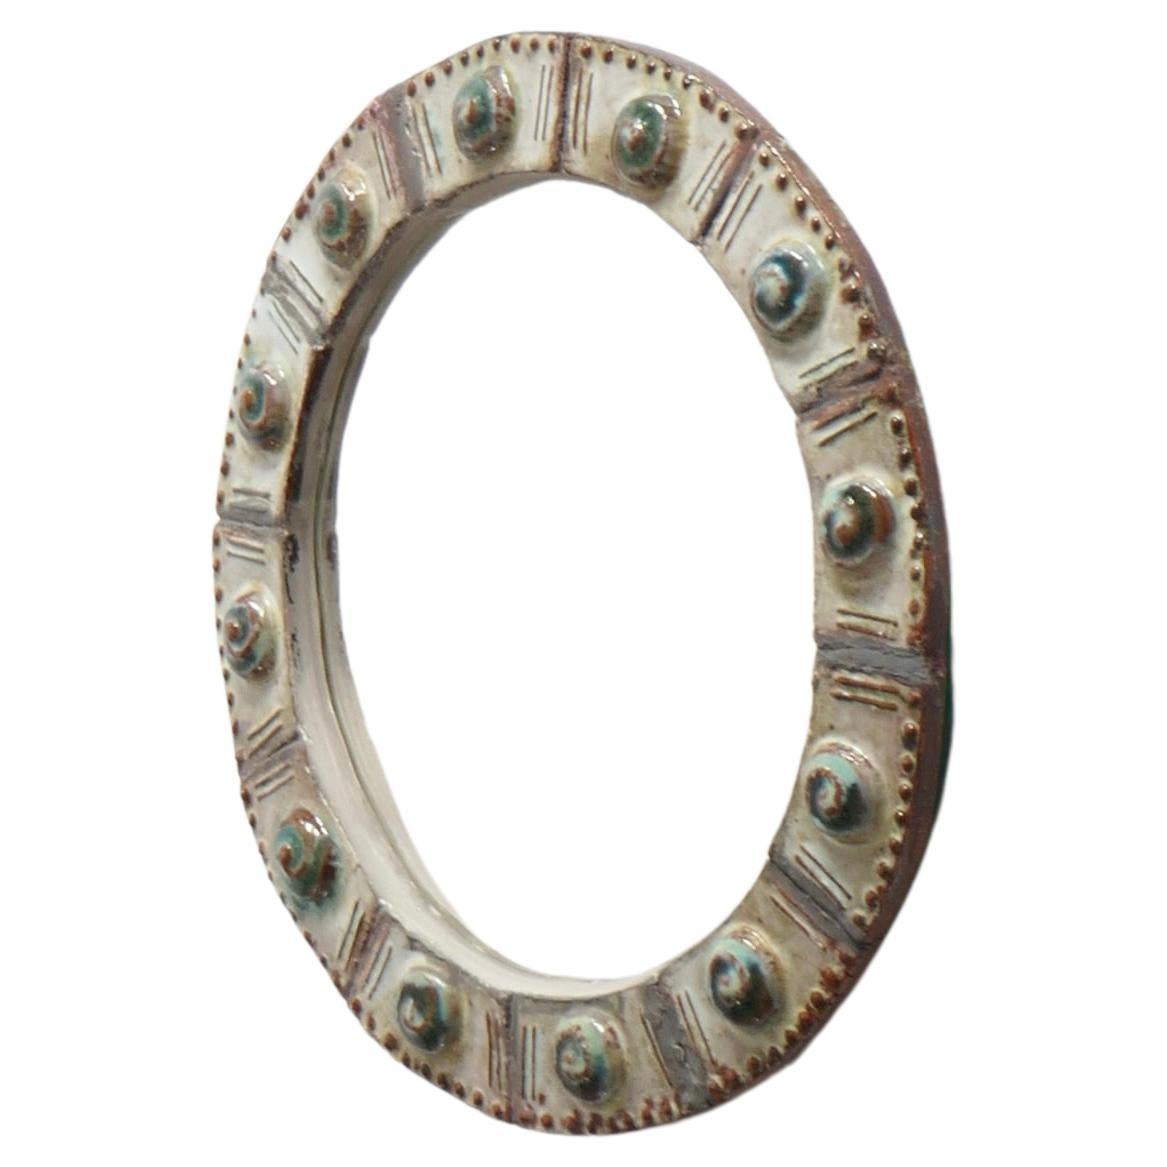 Small round ceramic mirror in white tones embellished with raised round patterns in a shade of green and ocher or terracotta. French work from the 1960s. It does not have a hook on the back but you can attach an invisible plate hanger for wall